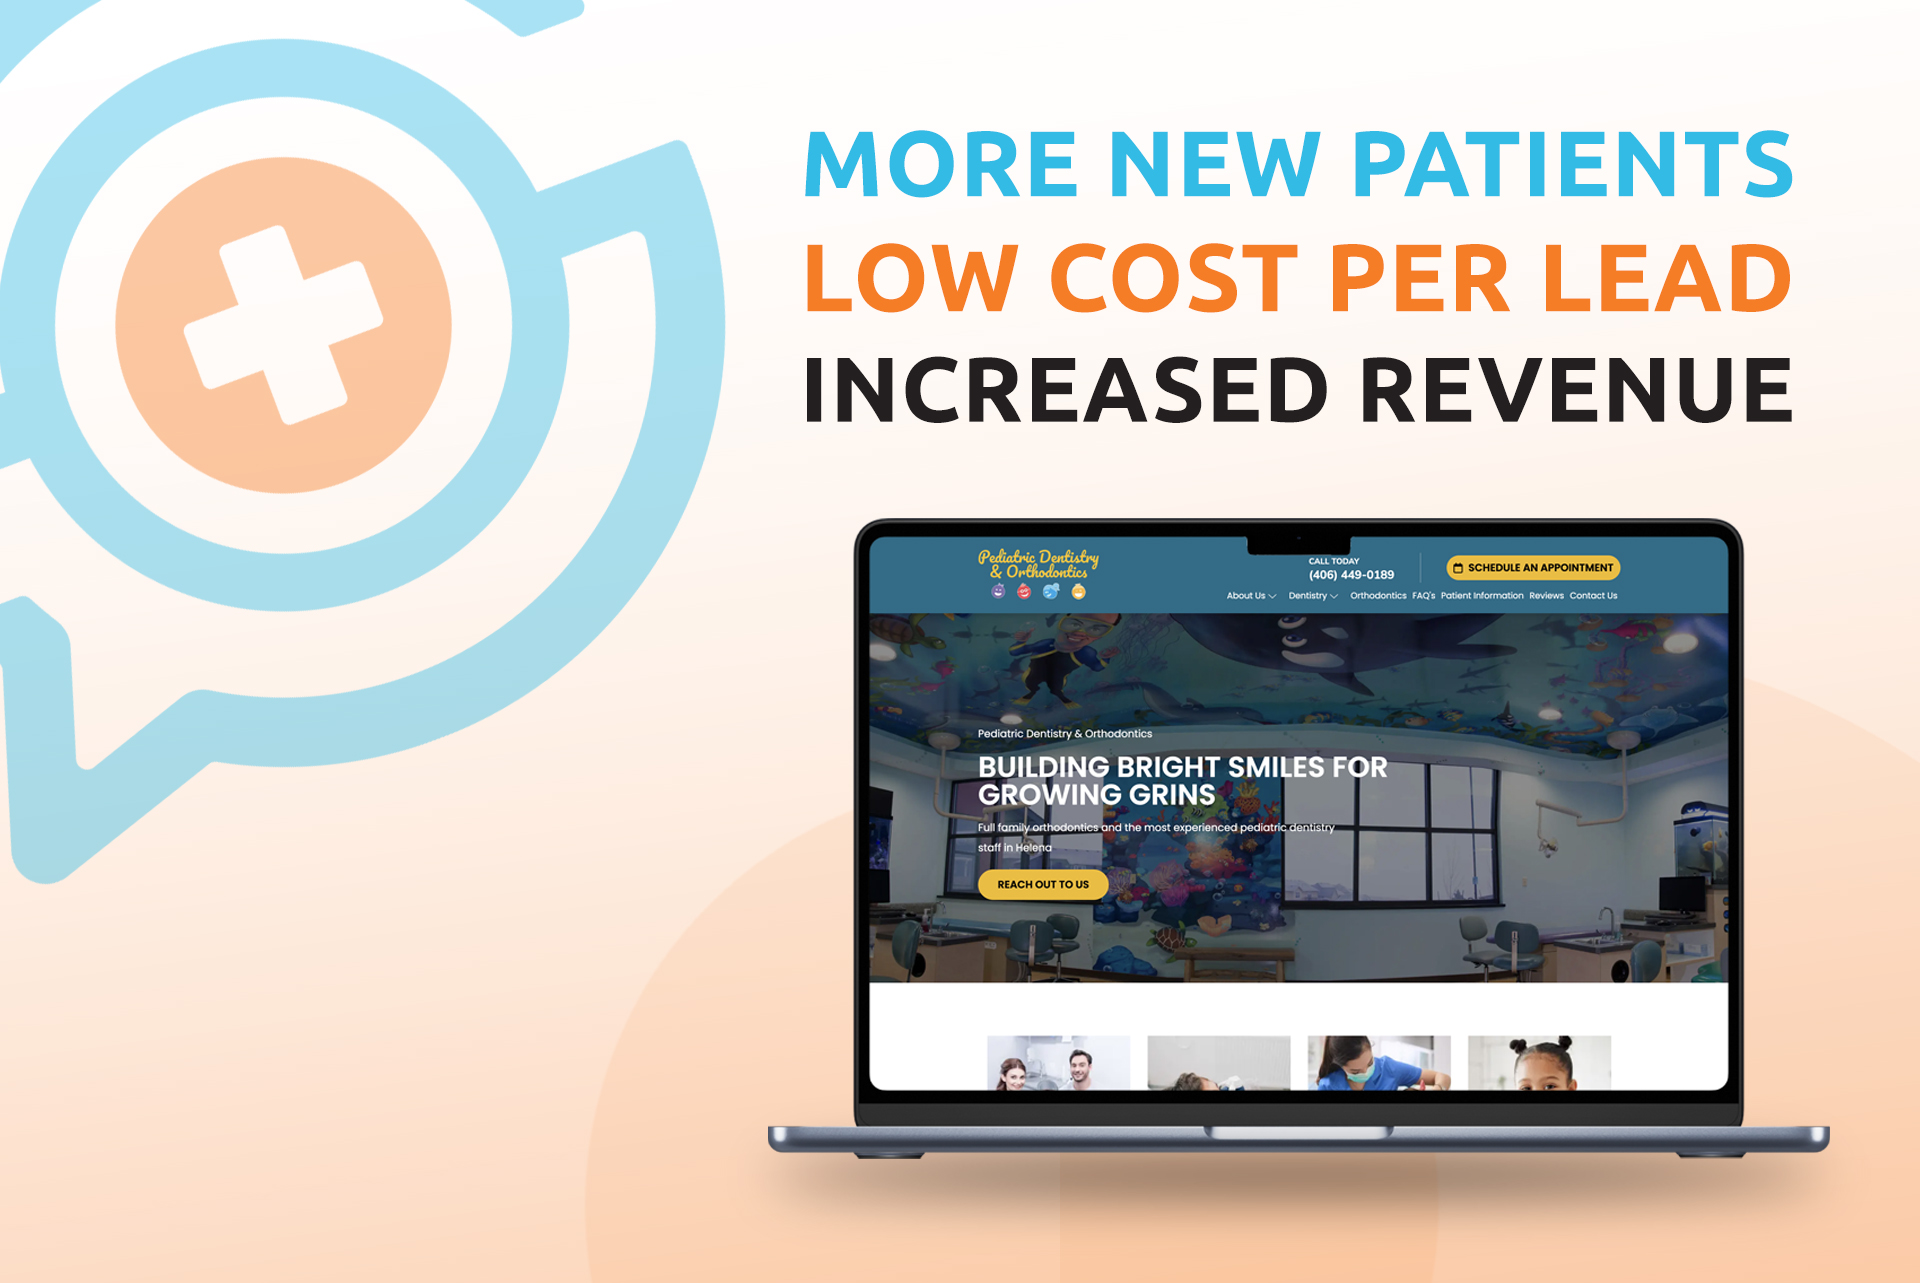 Strike Healthcare: More new patients, low cost per lead, increased revenue